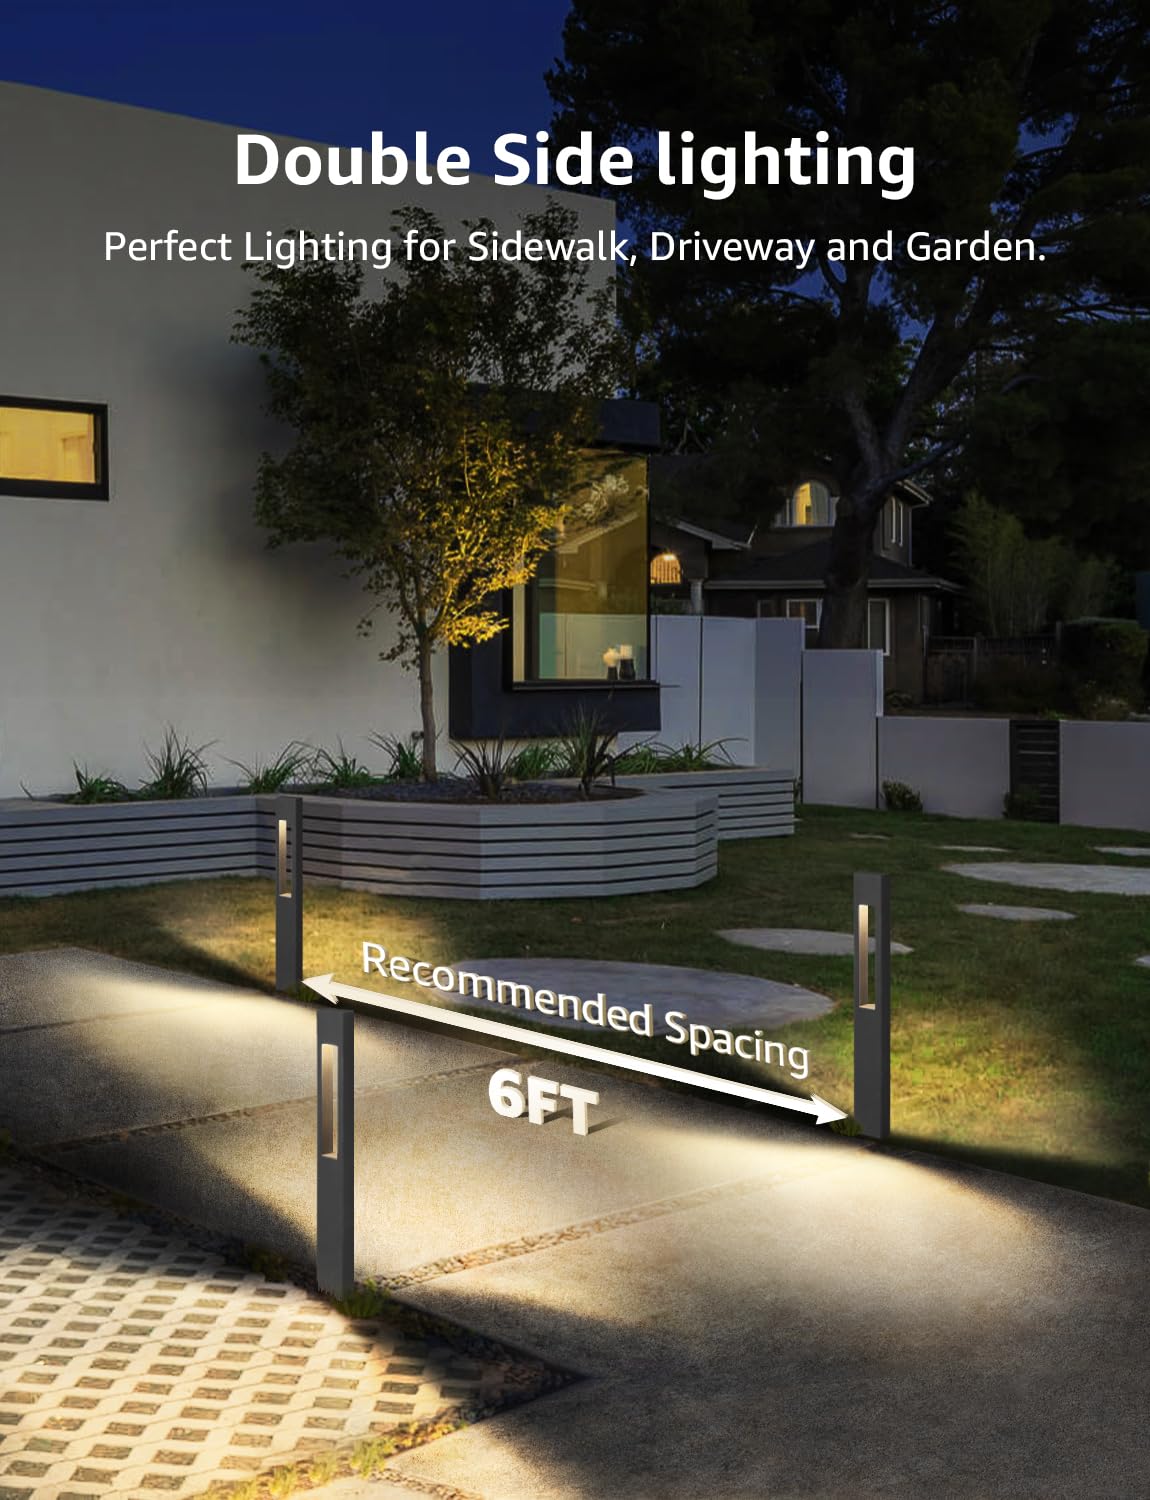 SUNVIE LED Low Voltage Landscape Lights 3W Pathway Lights Low Voltage 12-24V Landscape Path Lights 3000K CRI 90+ Aluminum Waterproof Pathway Lighting for Walkway Garden Yard ETL Listed Cord, 12 Pack